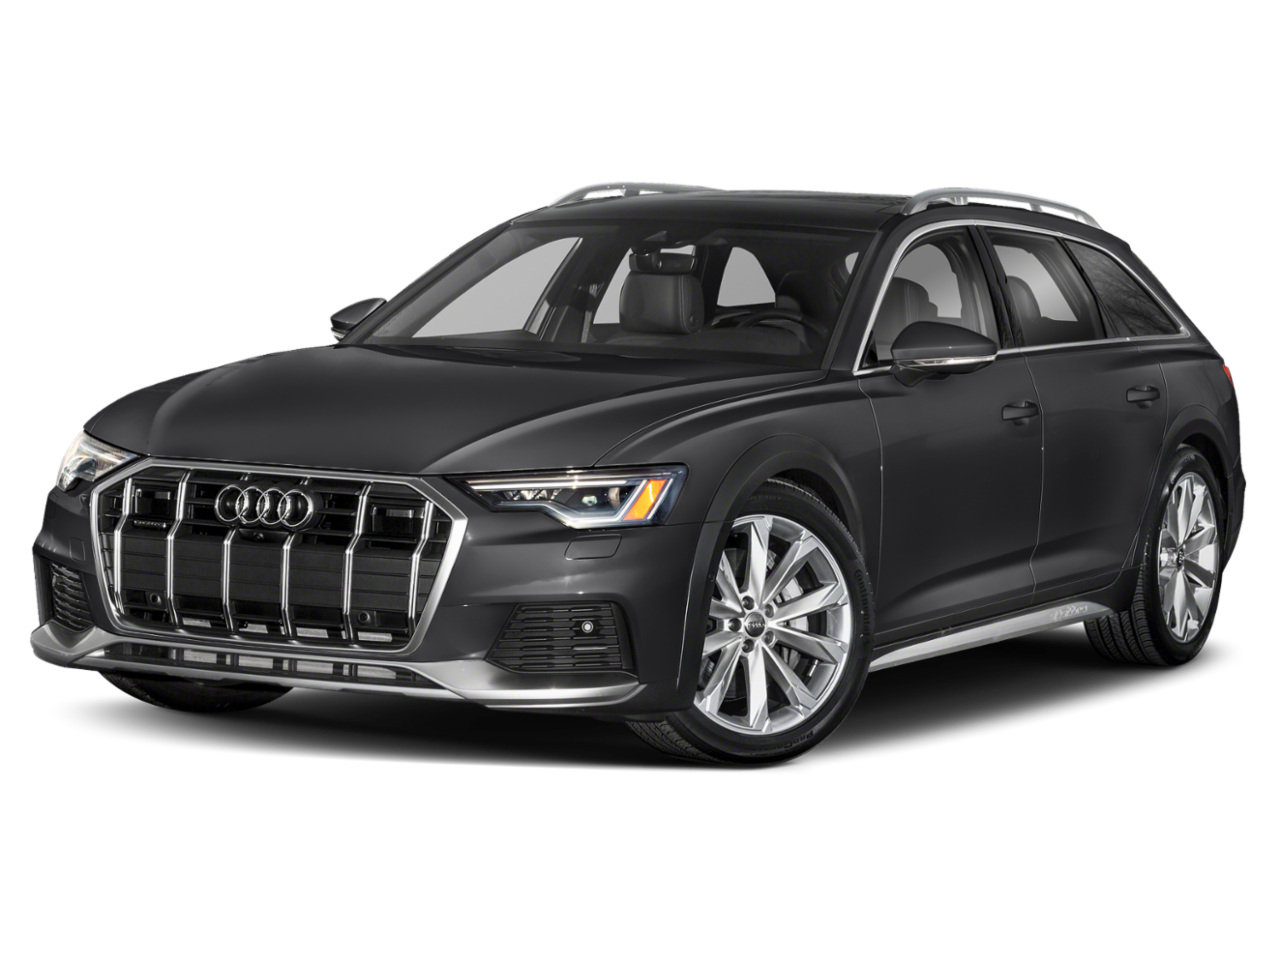 New Audi A6 allroad from your Appleton, WI dealership, Bergstrom Imports on  Victory Lane.